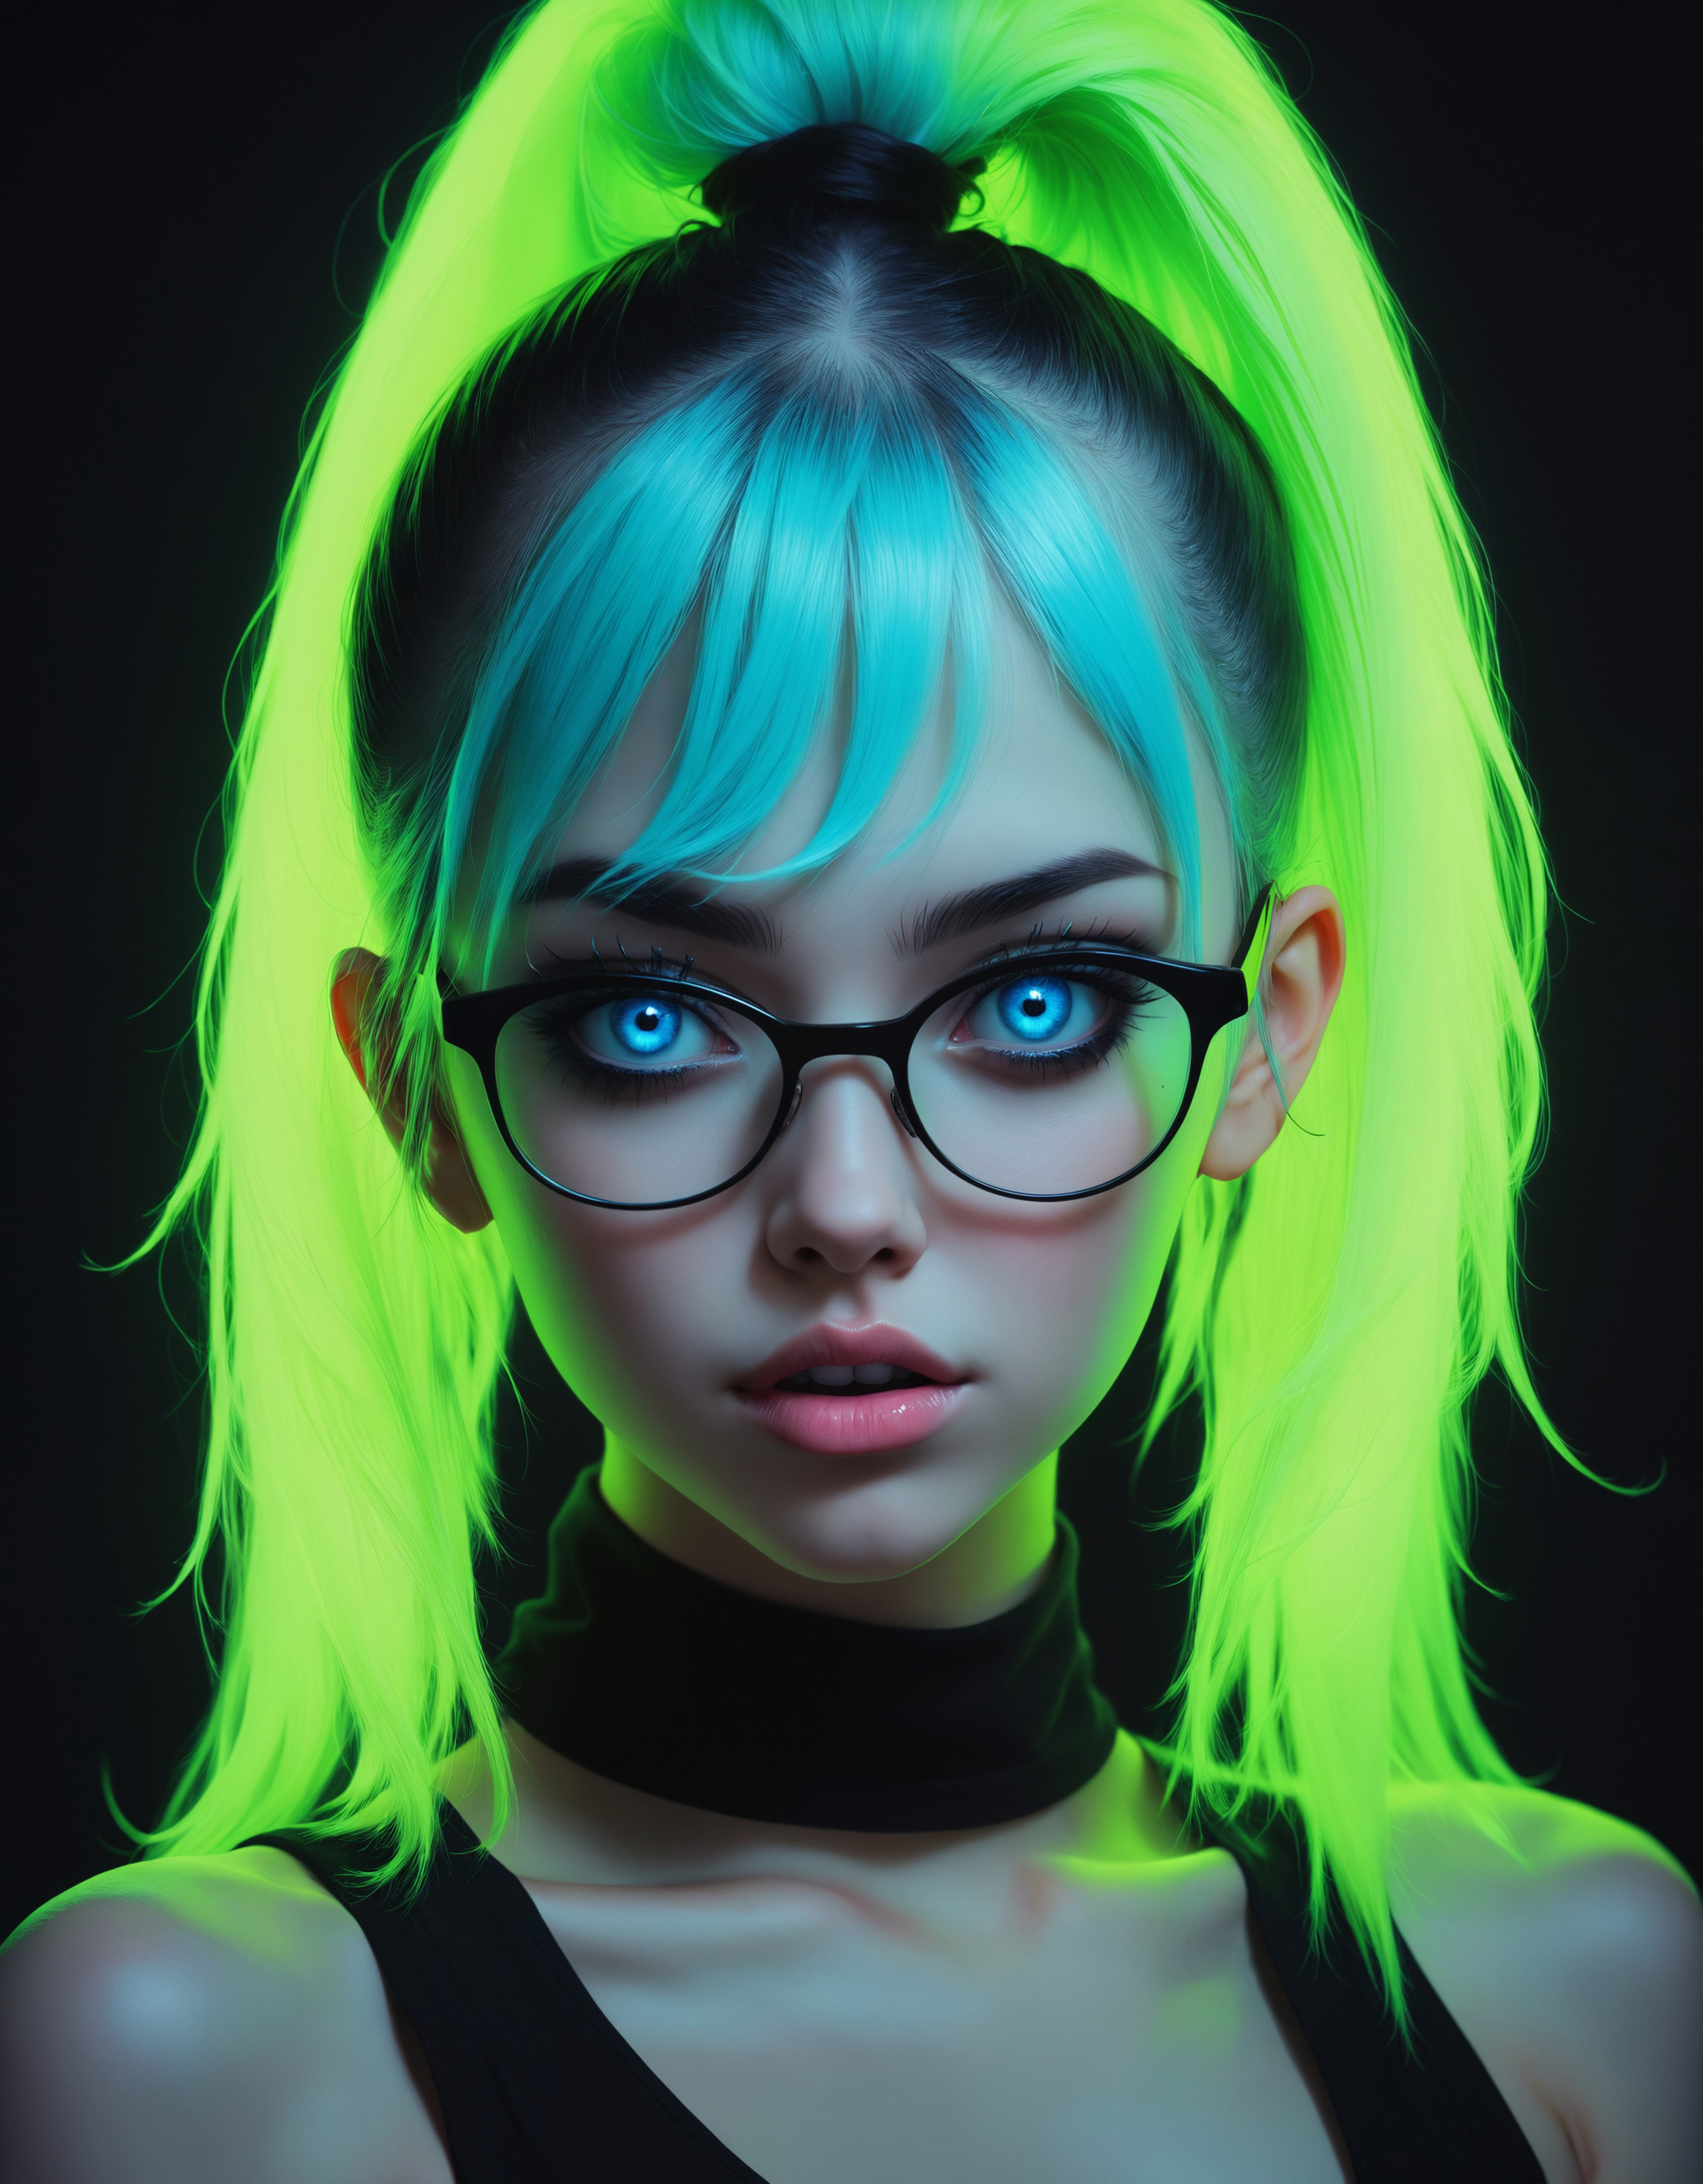 zavy-hrglw, A hauntingly beautiful glamour photo of a young woman with piercing blue eyes with glasses, 22 years old, neon...